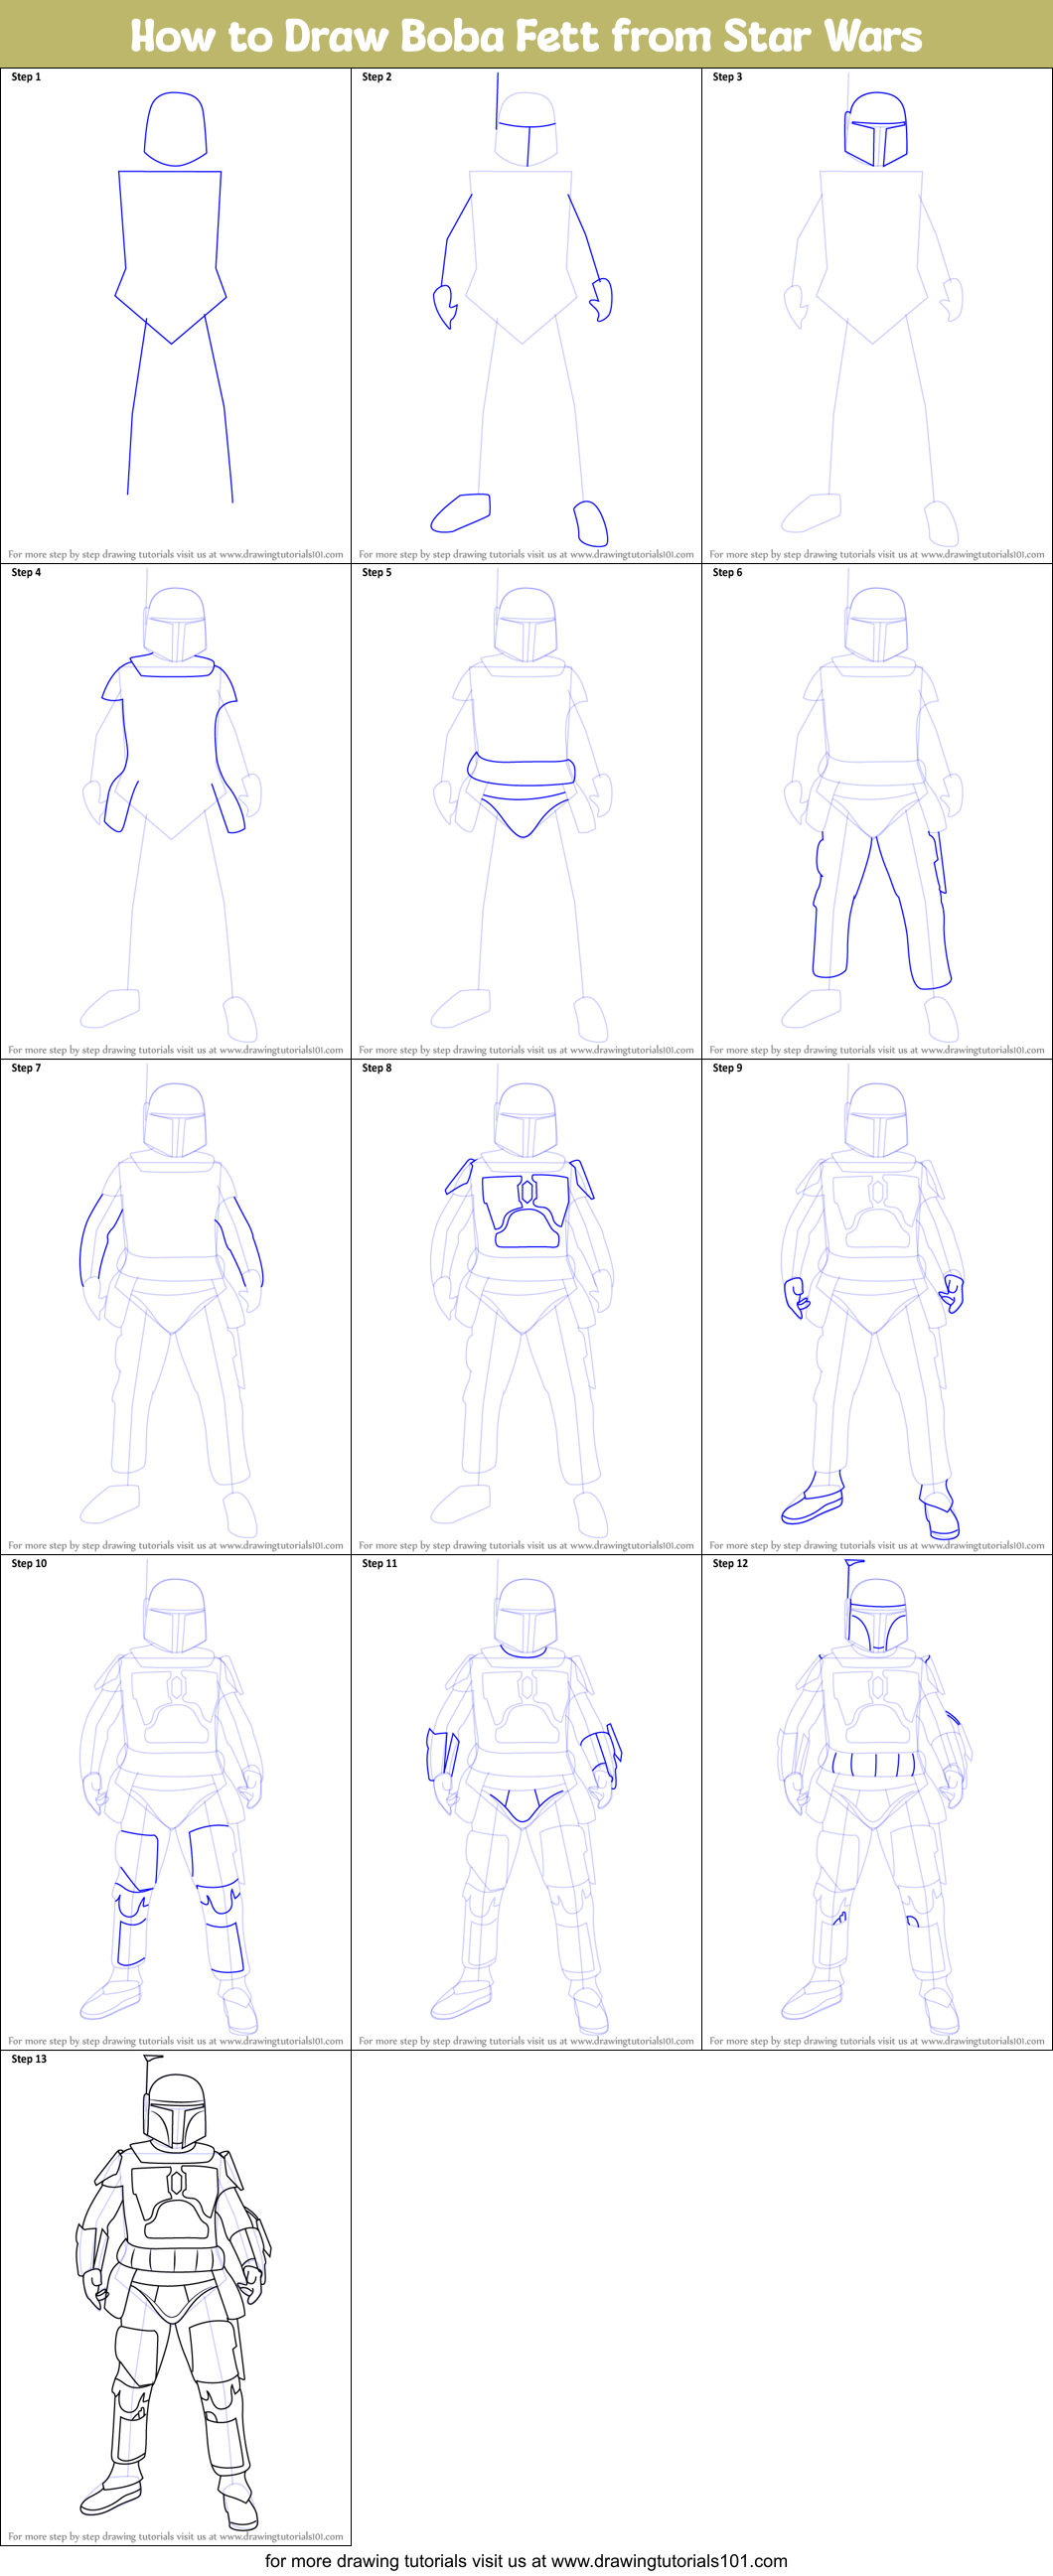 How to Draw Boba Fett from Star Wars printable step by step drawing